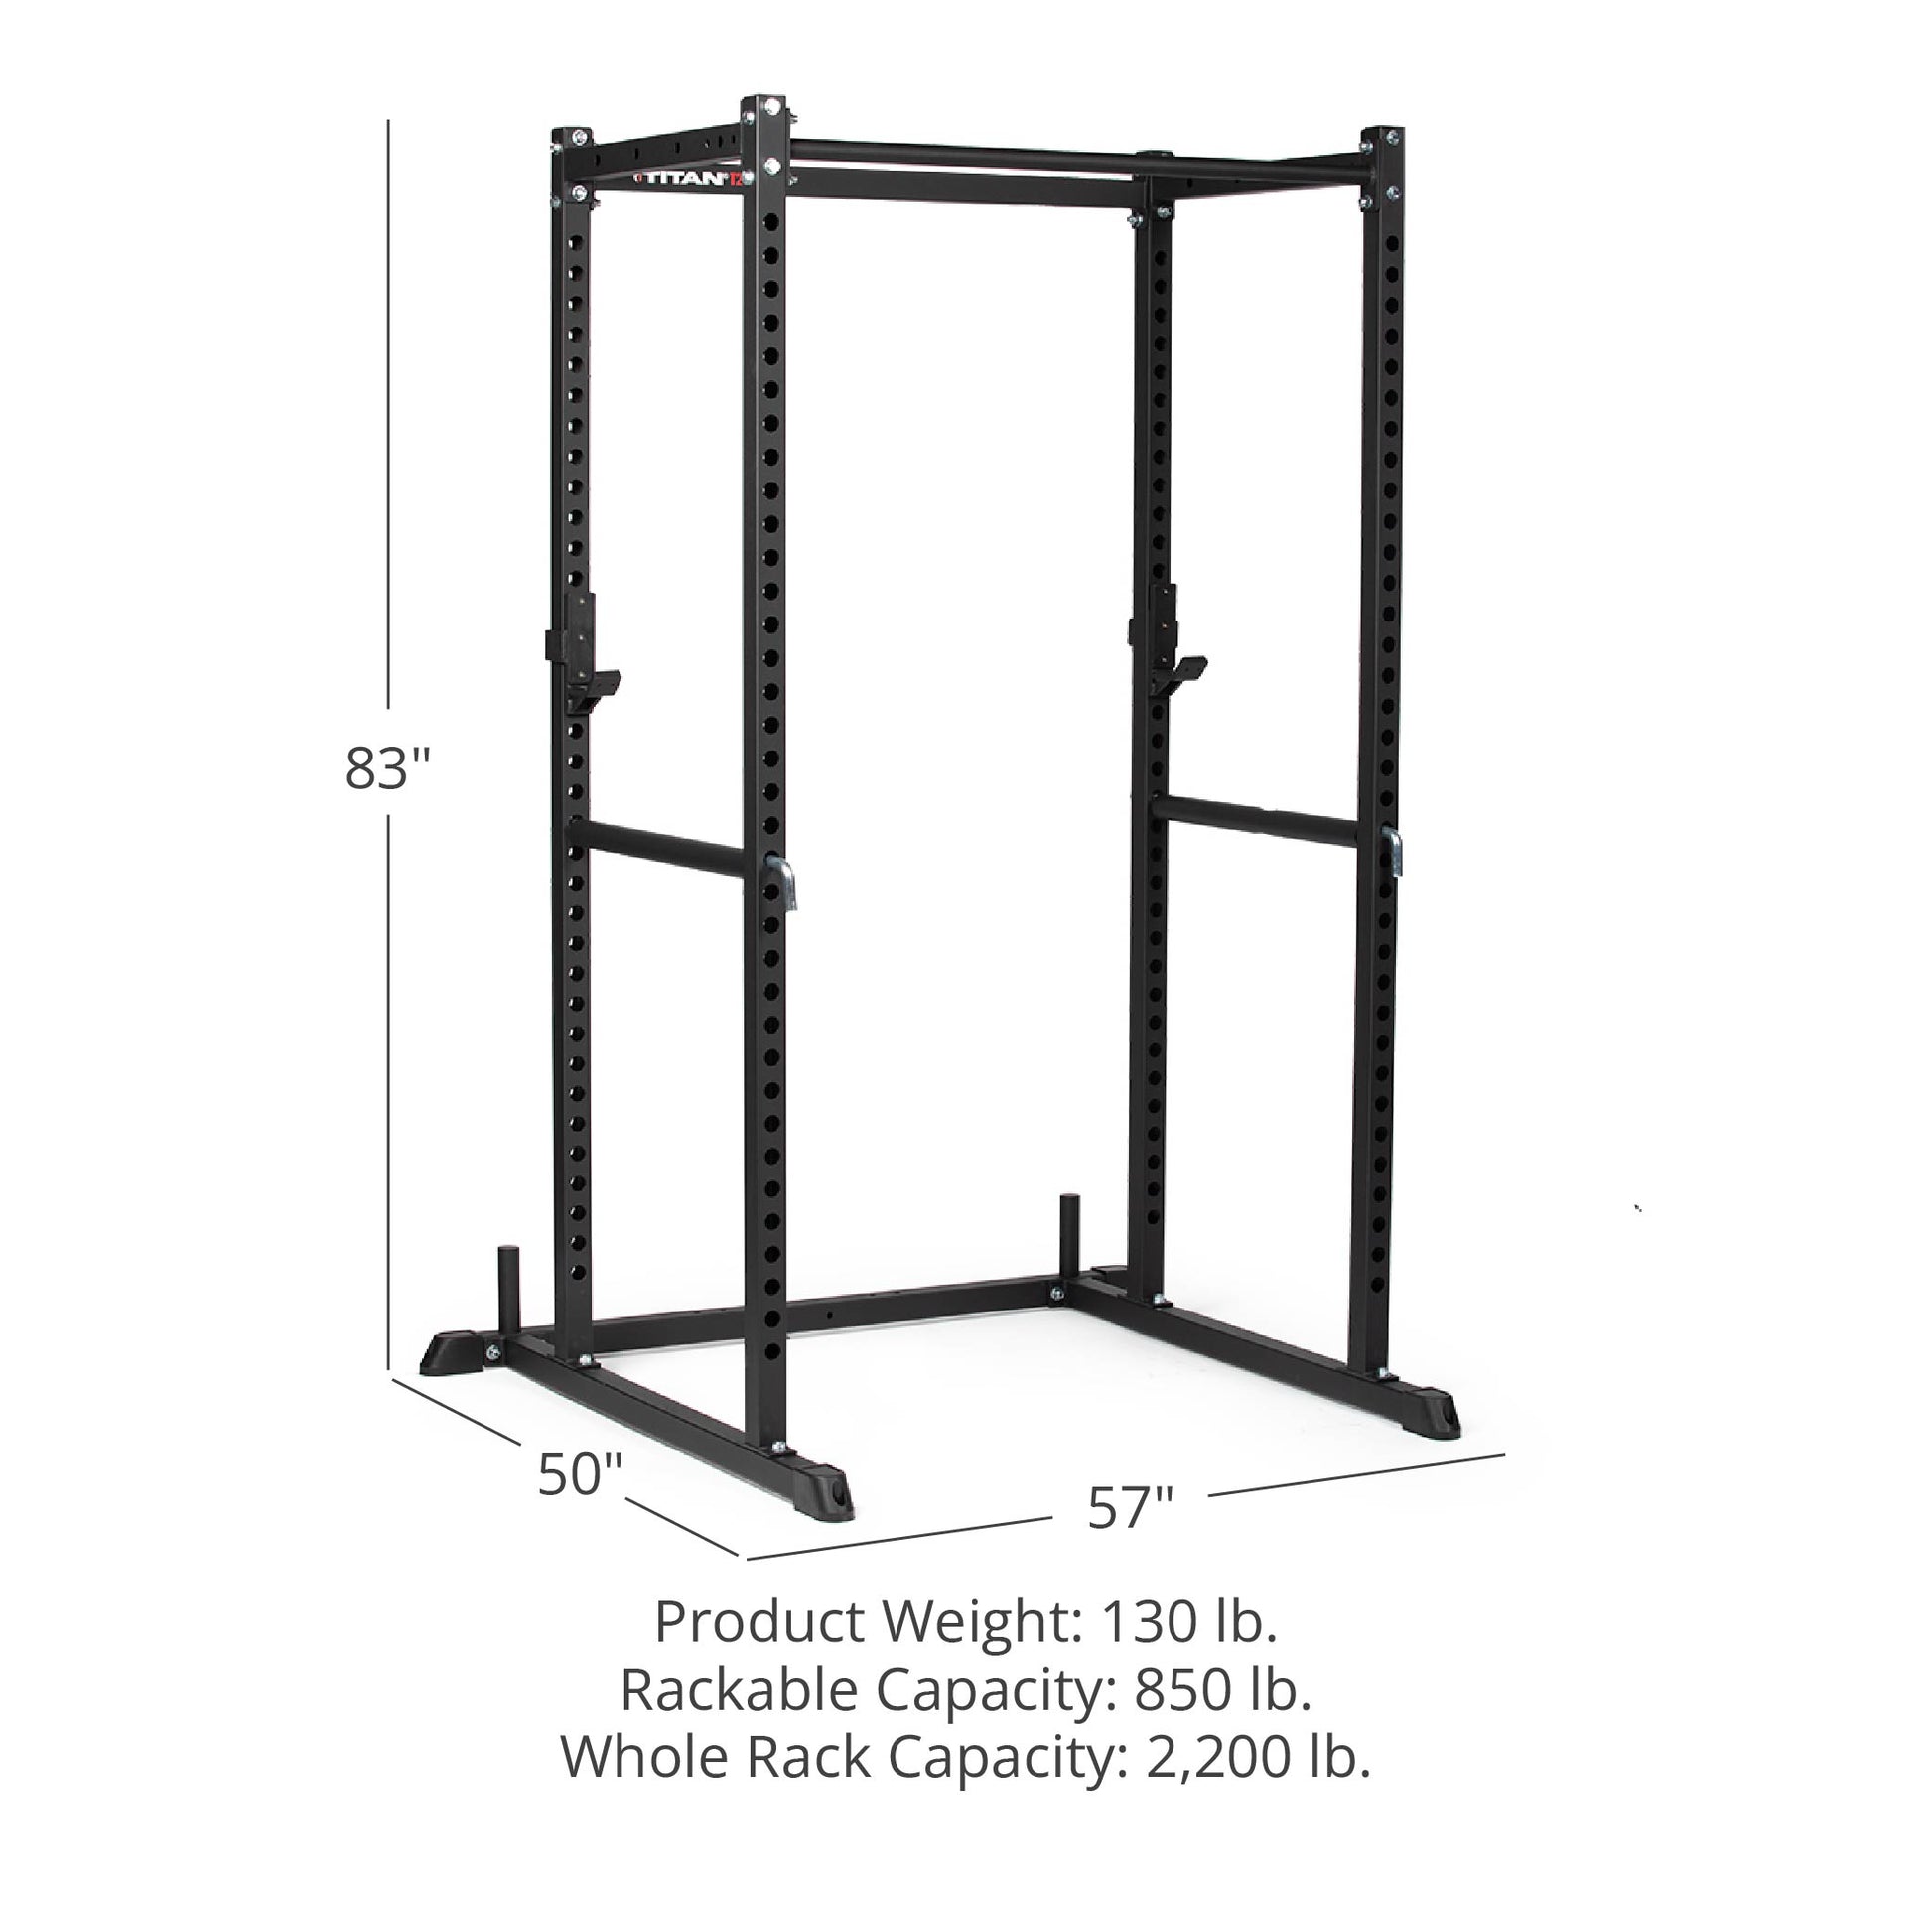 T-2 Series Power Rack | Image Shows Height of 83", Length of 50", Width of 57". Product Weight: 130 lb. Rackable Capacity: 850 lb. Whole Rack Capacity: 2,200 lb.